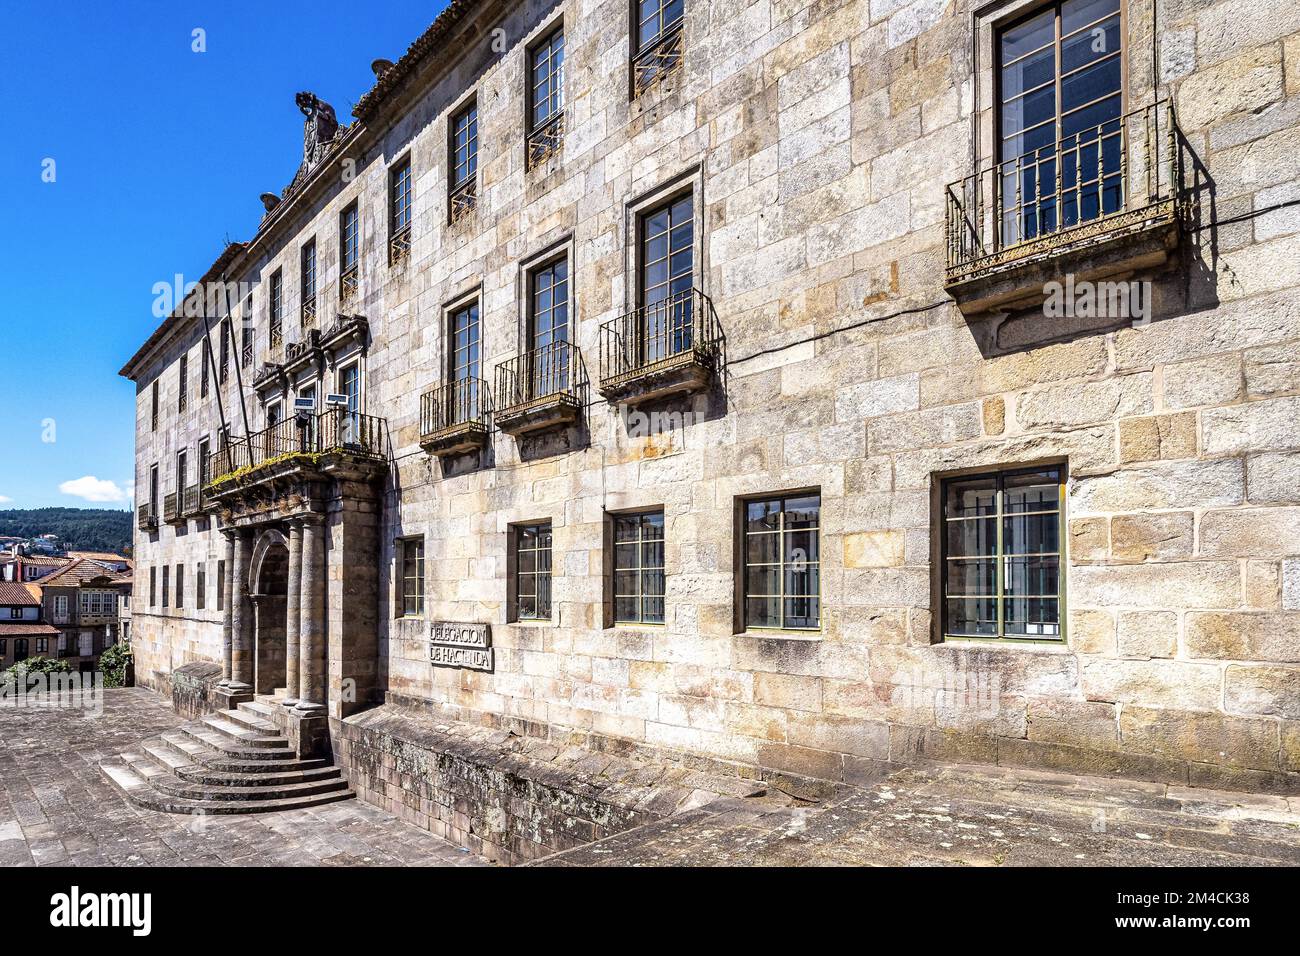 Herreria square and San Francisco convent in the old town of Pontevedra, Galicia, Spain. Stock Photo